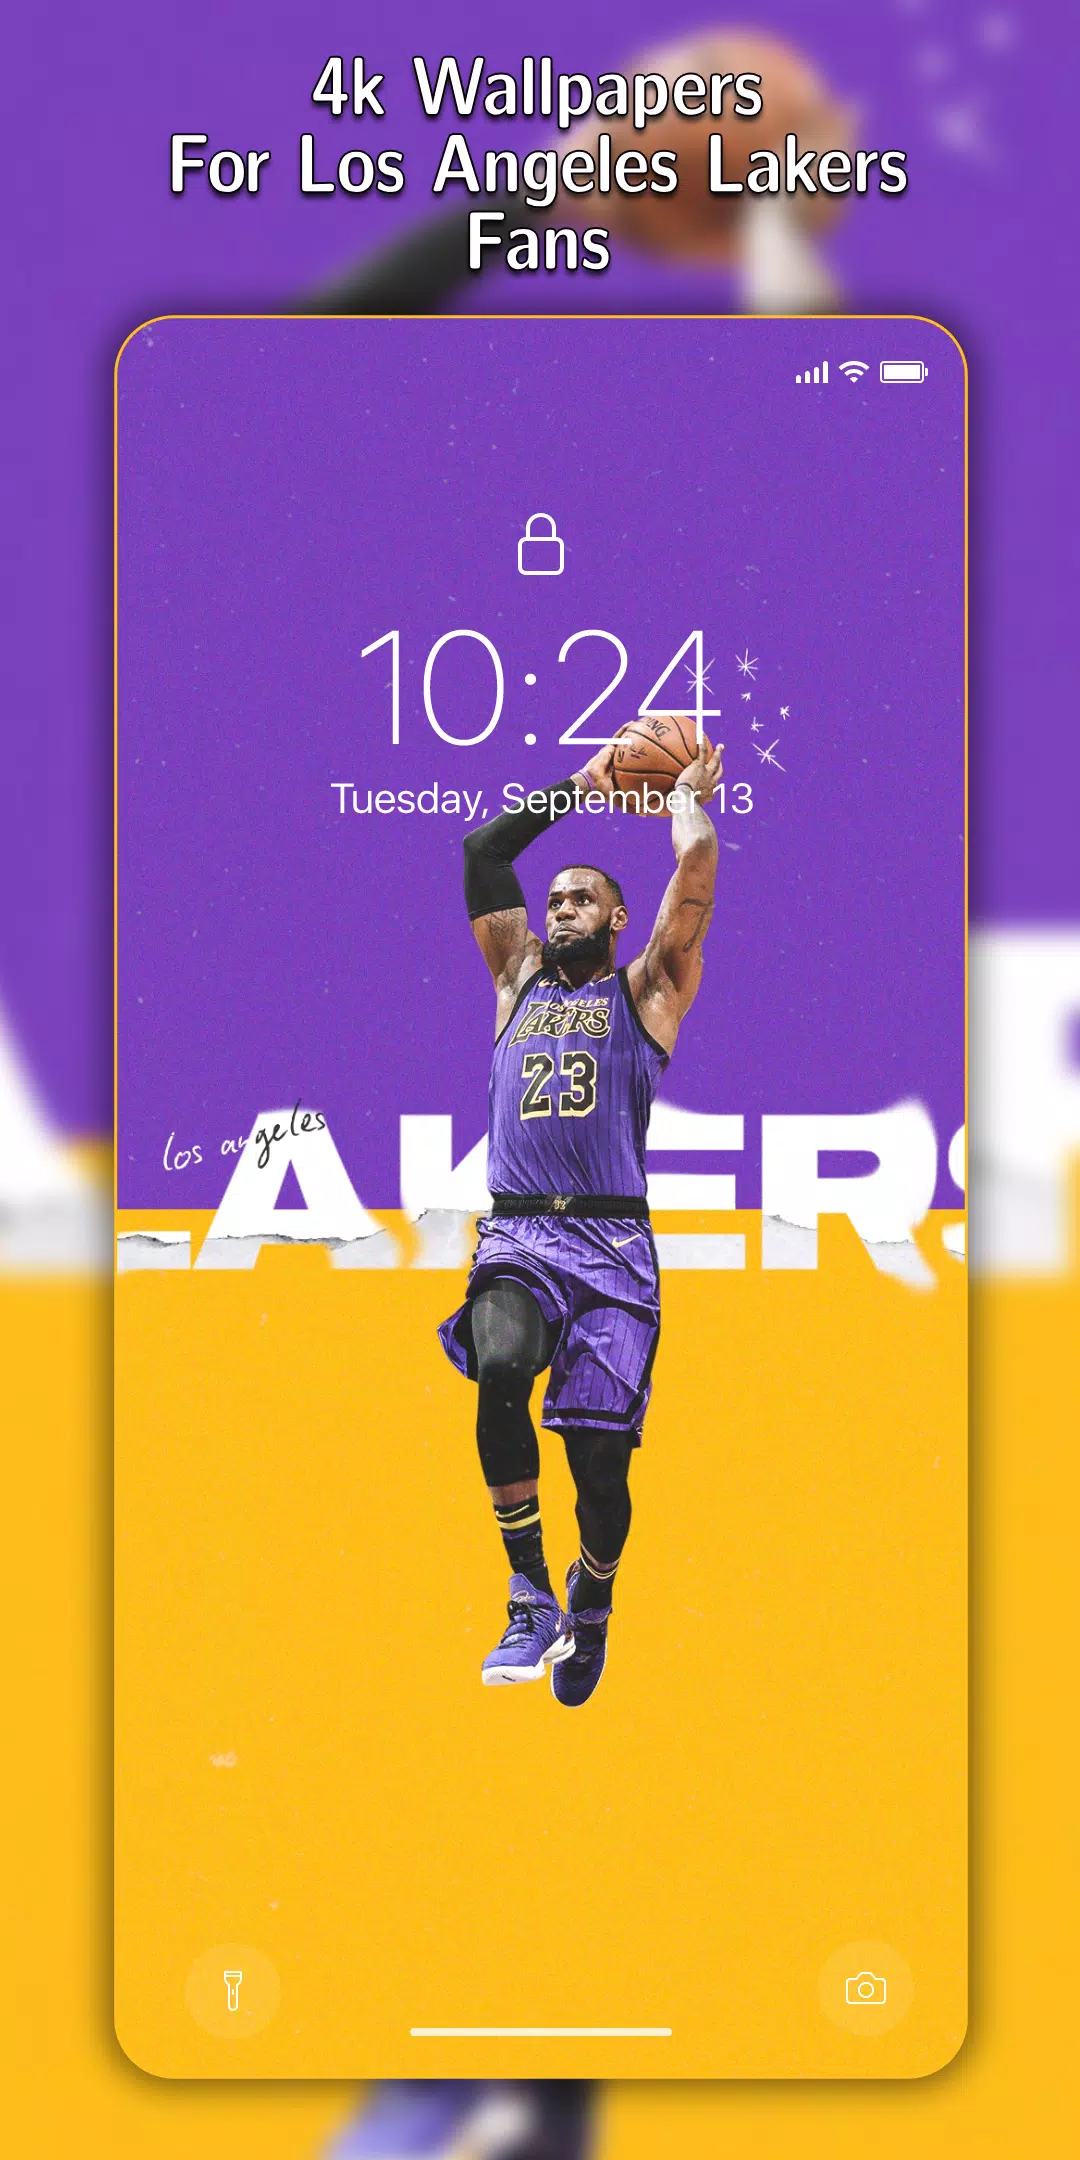 K wallpaper for los angeles lakers apk for android download